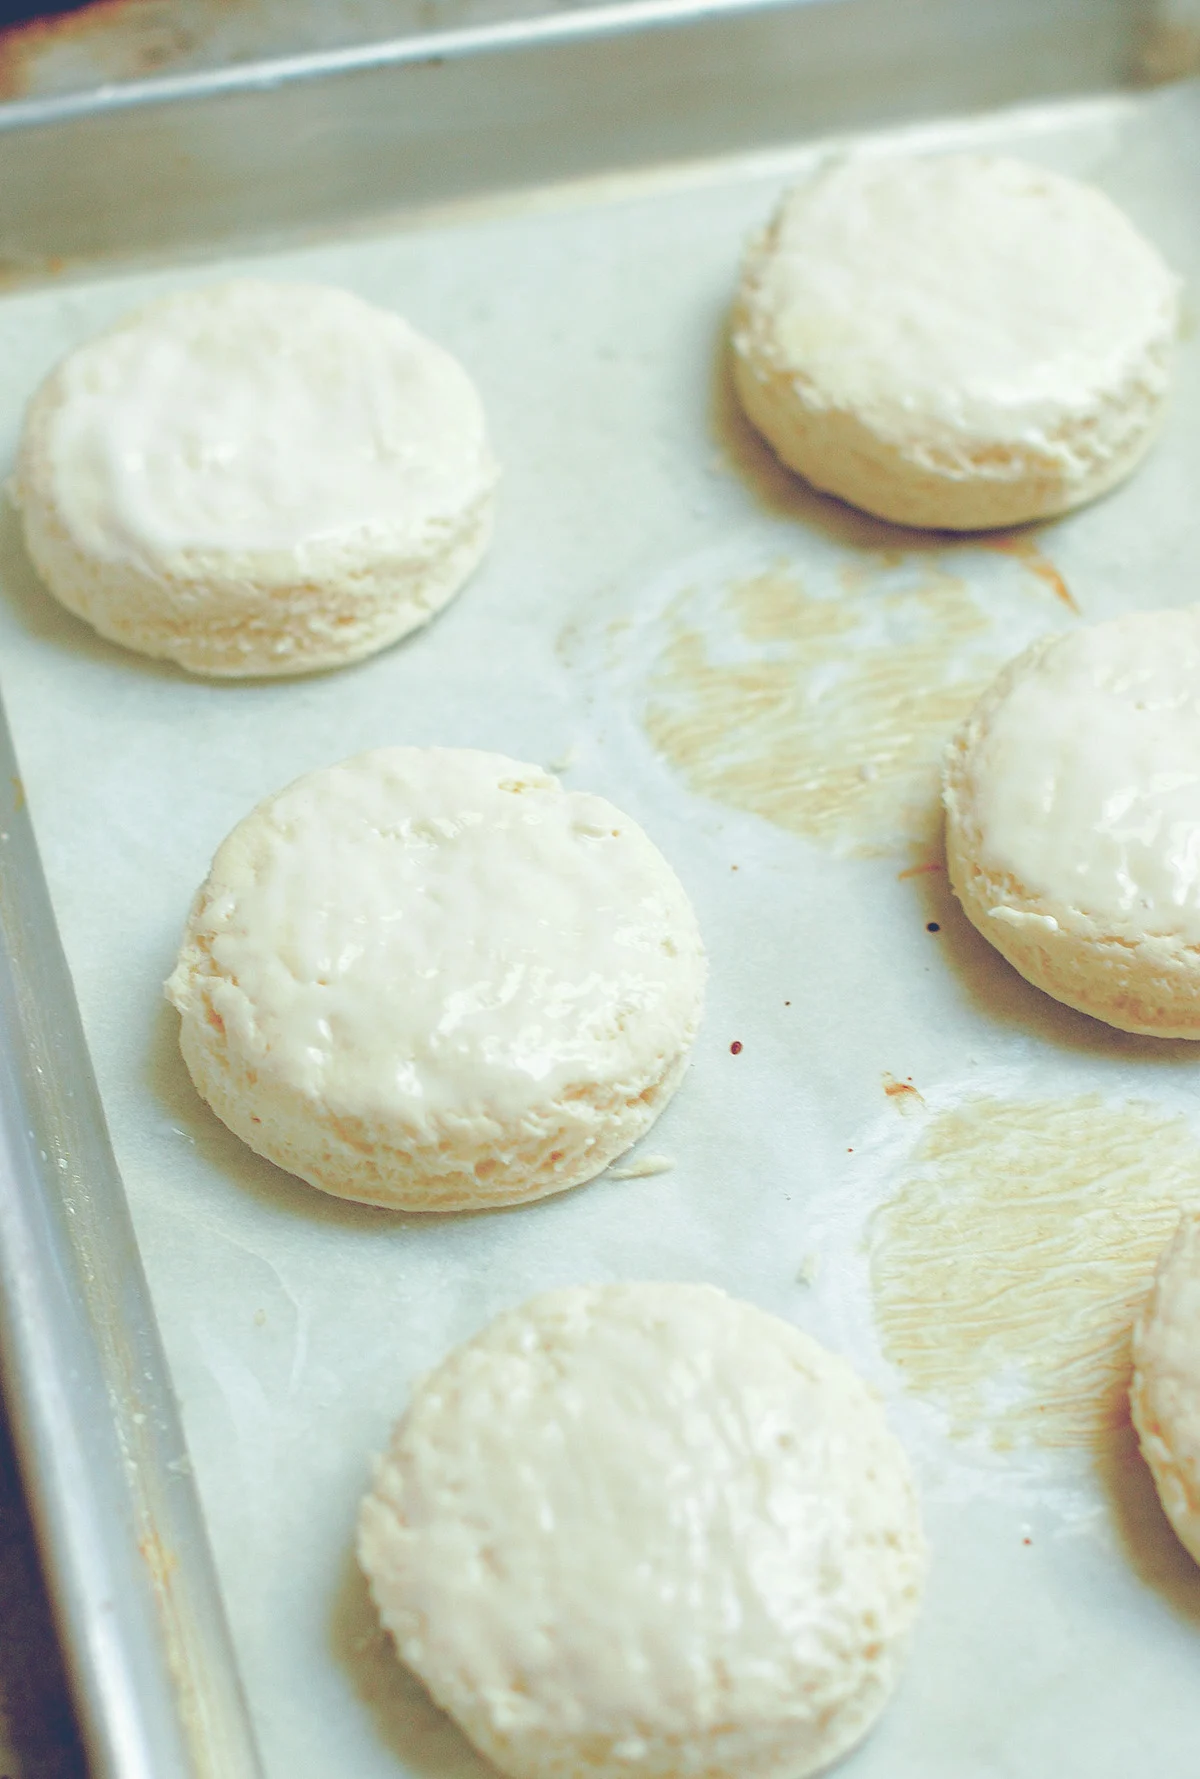 unbaked biscuits on a baking sheet.